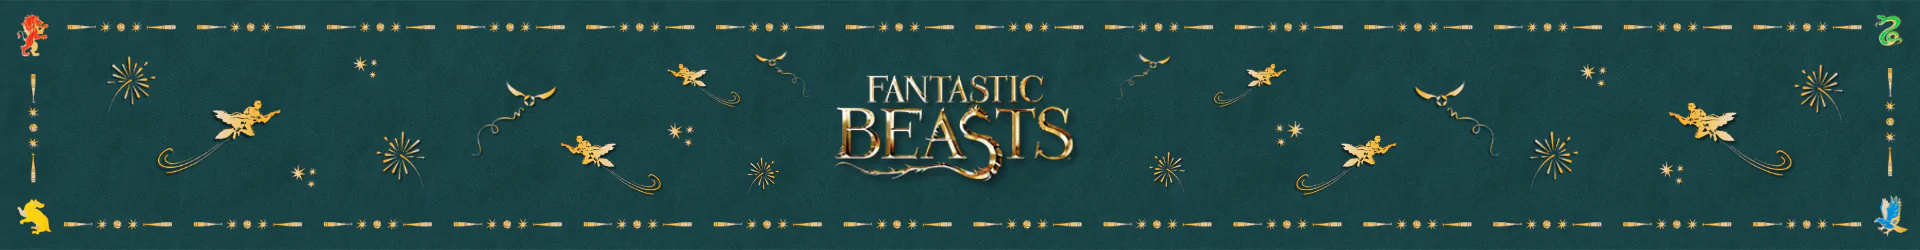 Fantastic Beasts and Where to Find Them products banner